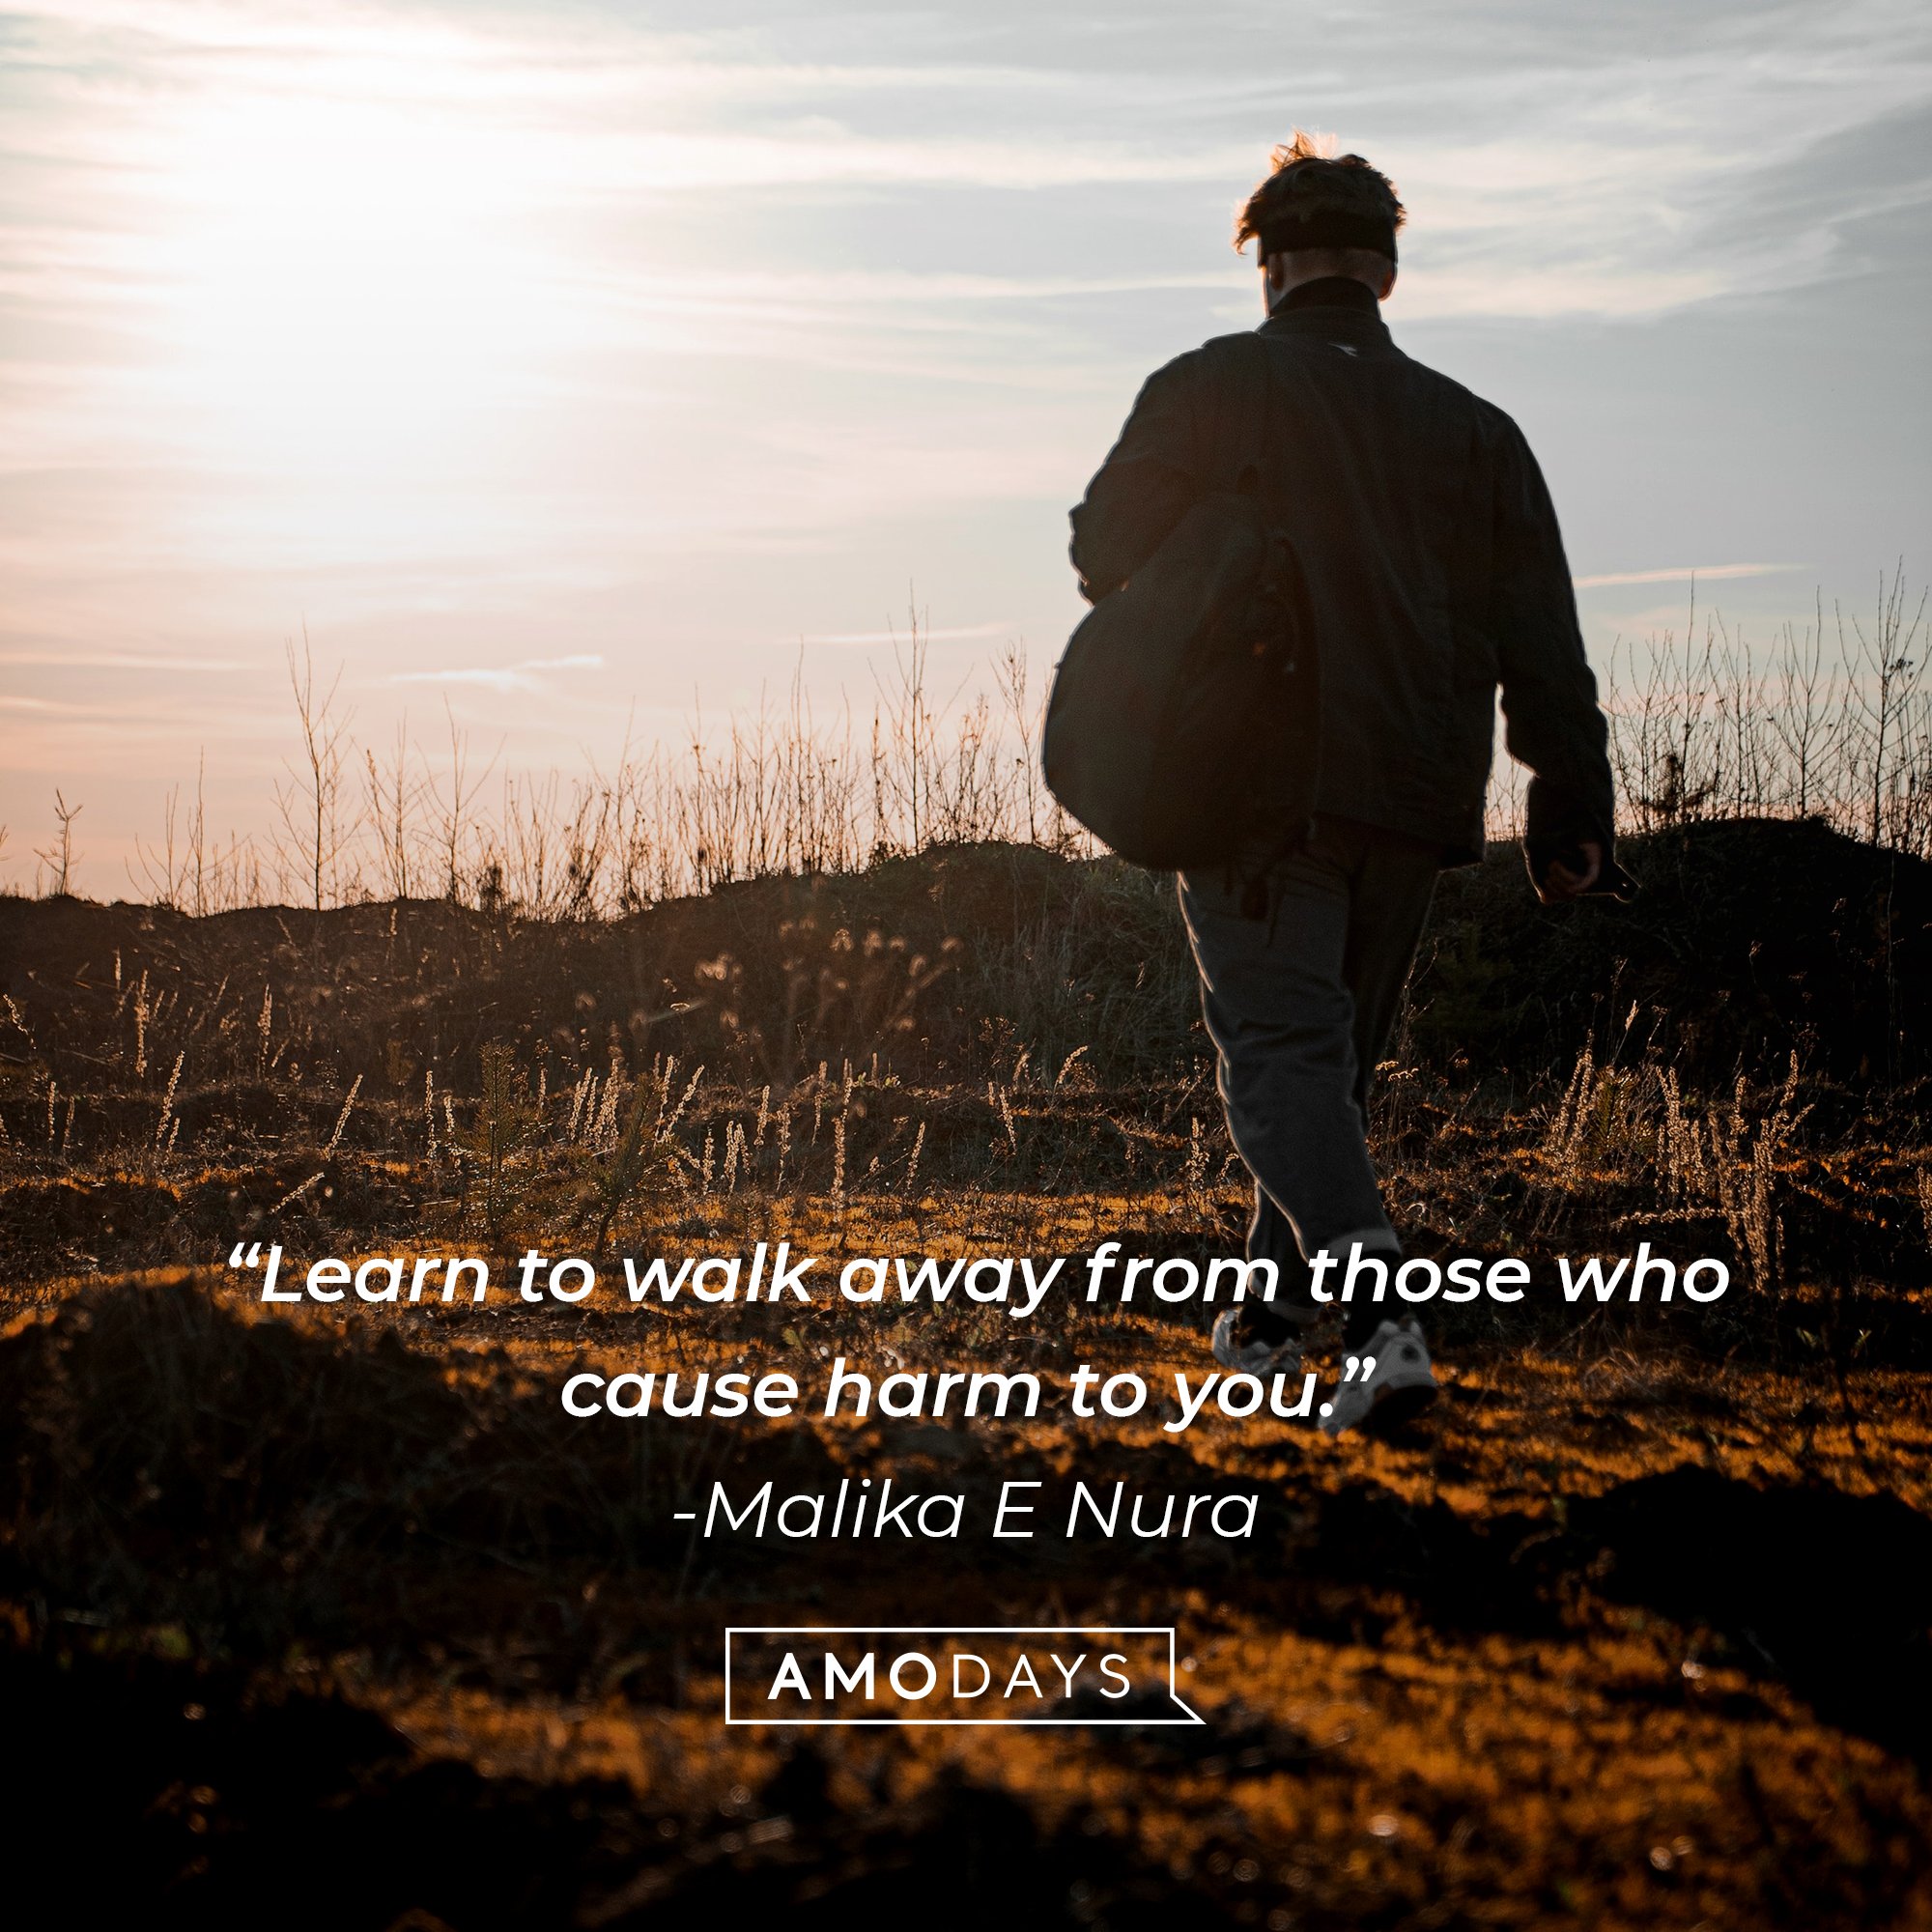 Malika E Nura's quote: “Learn to walk away from those who cause harm to you.” | Image: AmoDays